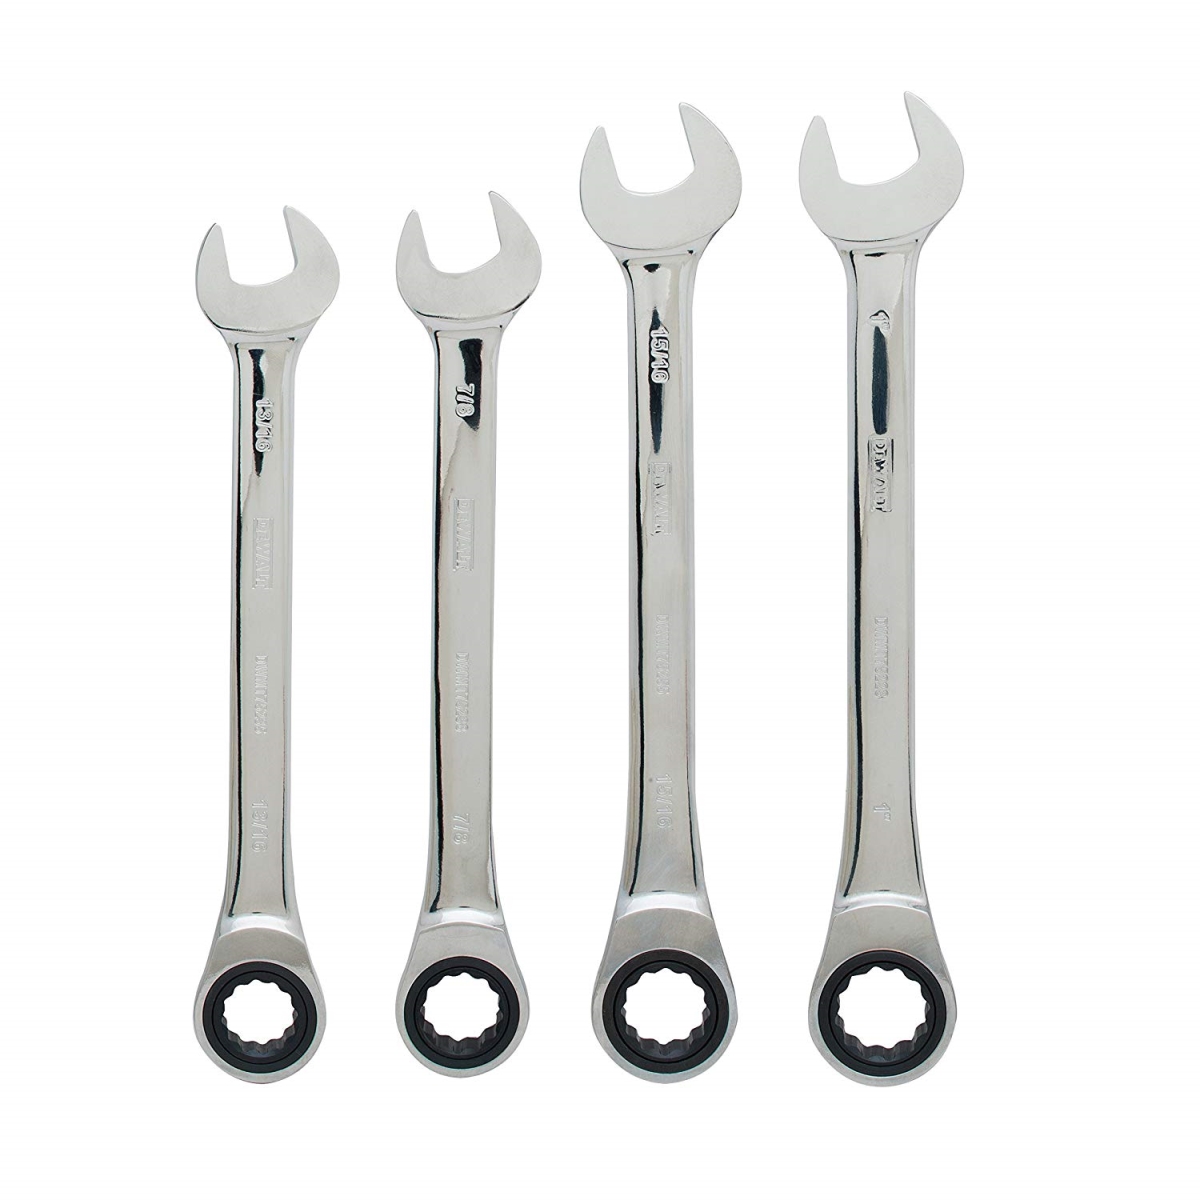 Dwmt74193 Ratcheting Combination Sae Wrench Set - 4 Piece